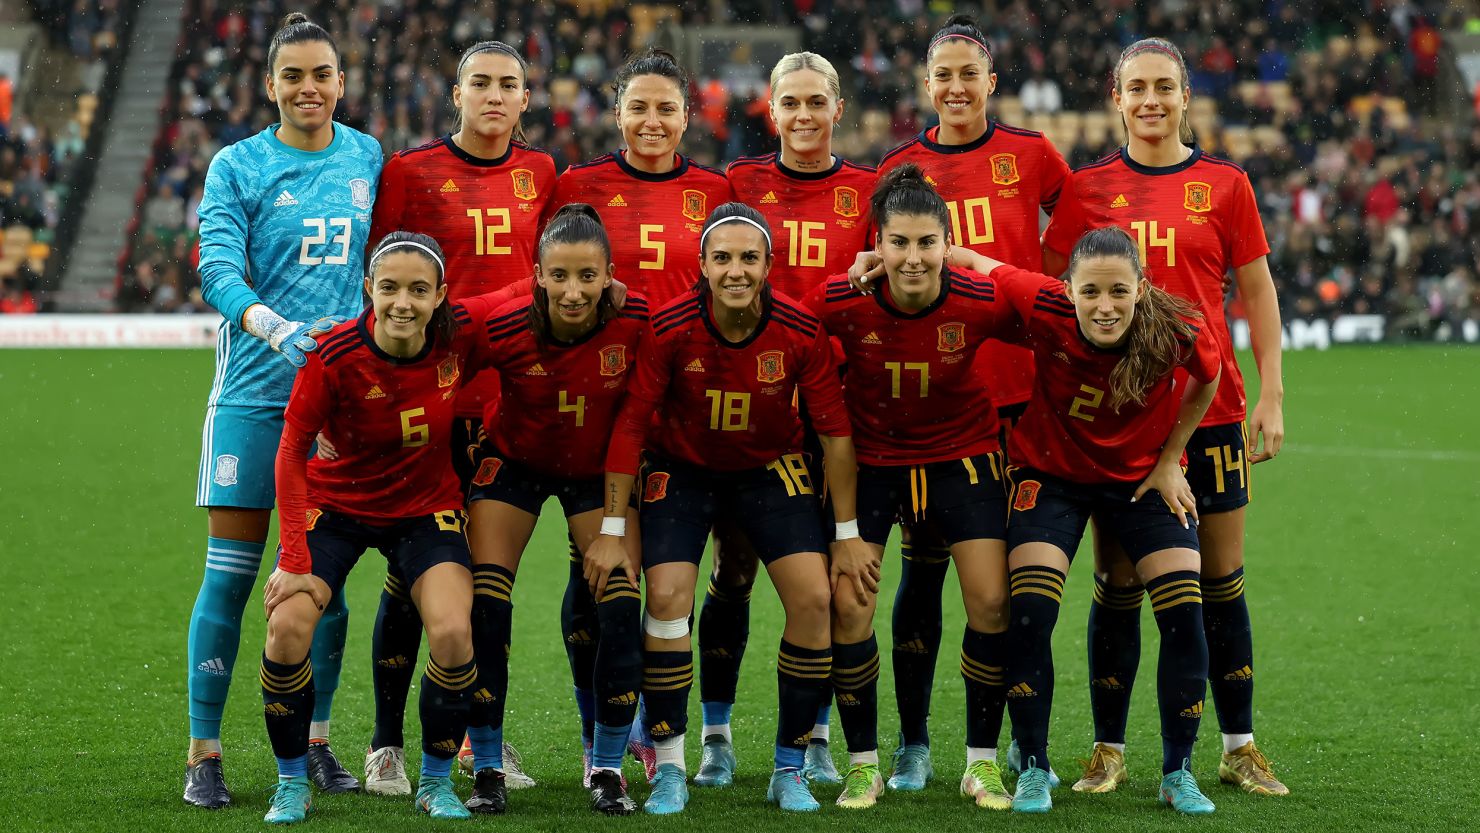 40-facts-about-spain-national-football-team